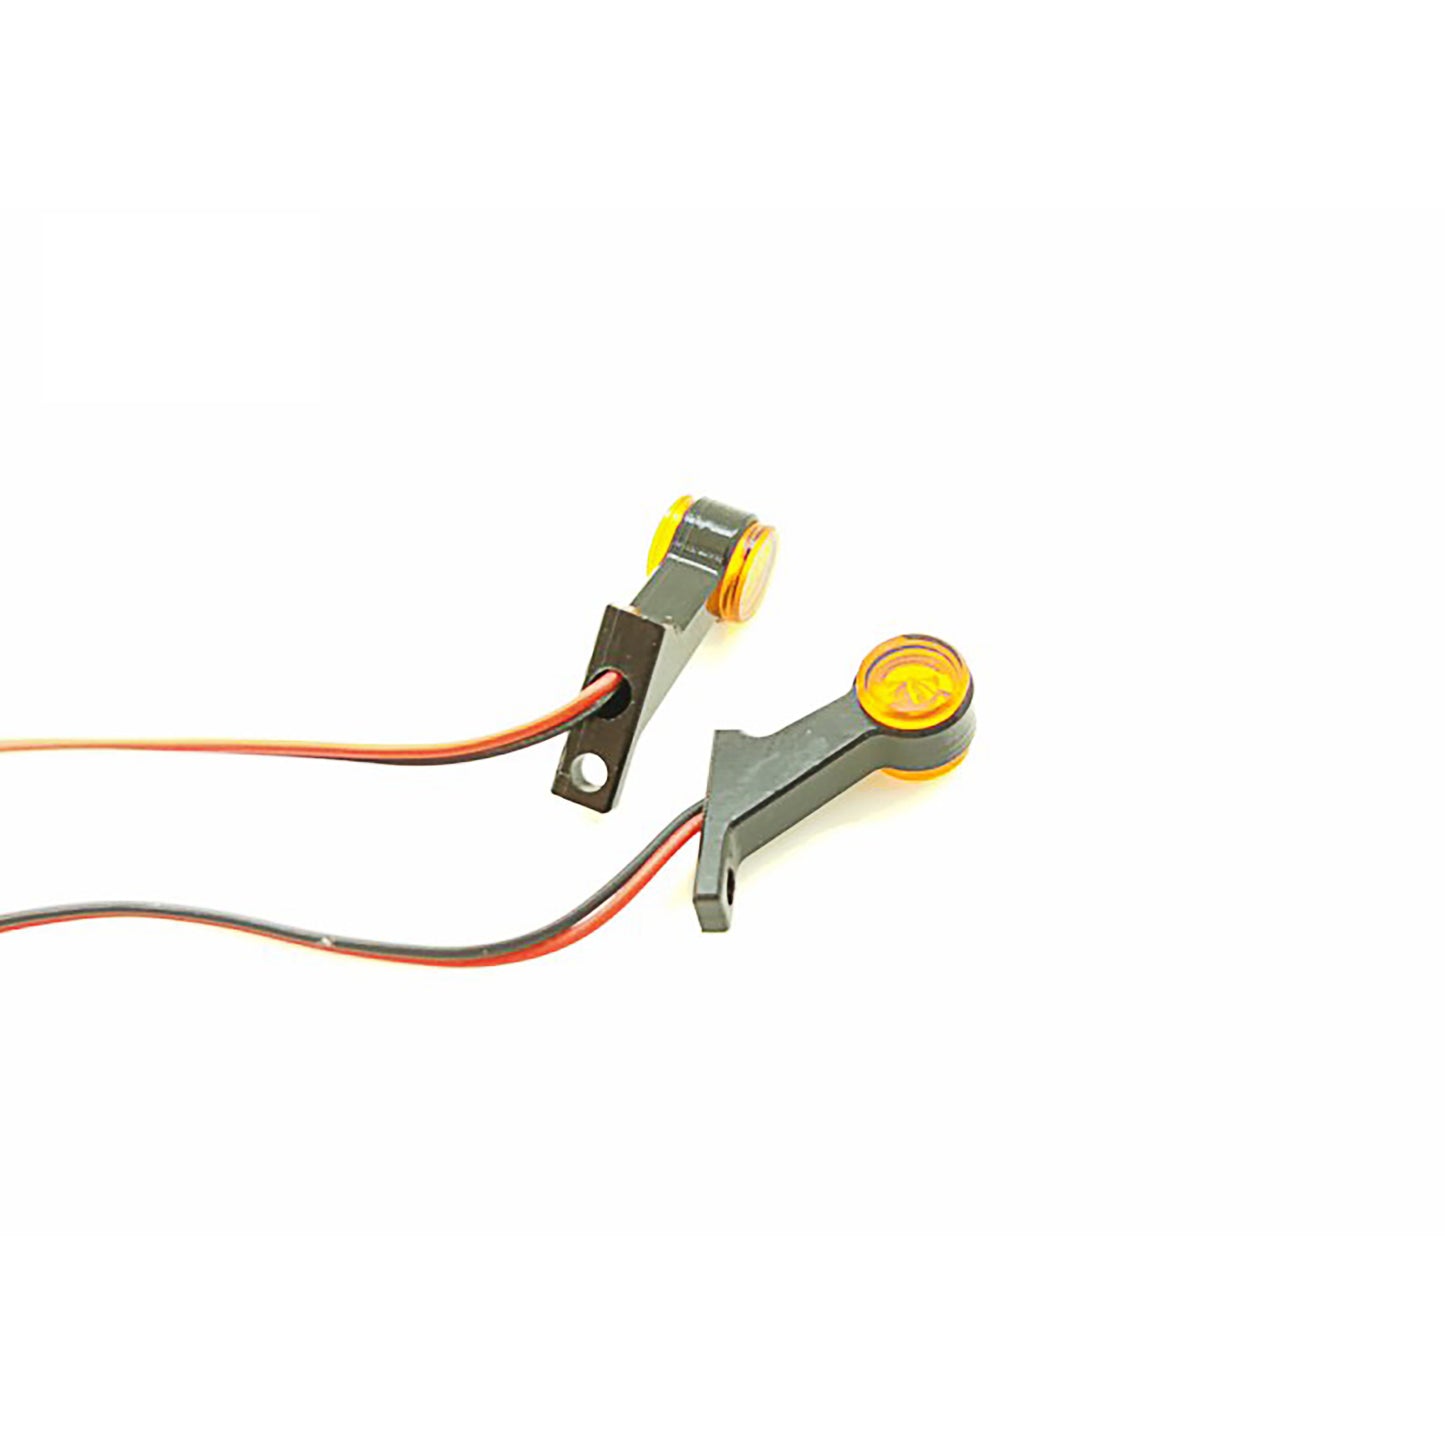 Position light Degree Model LED Lamp Universal Upgrade Spare Part for Tamiye 1/14 56360 LESU RC Tractor Truck Car